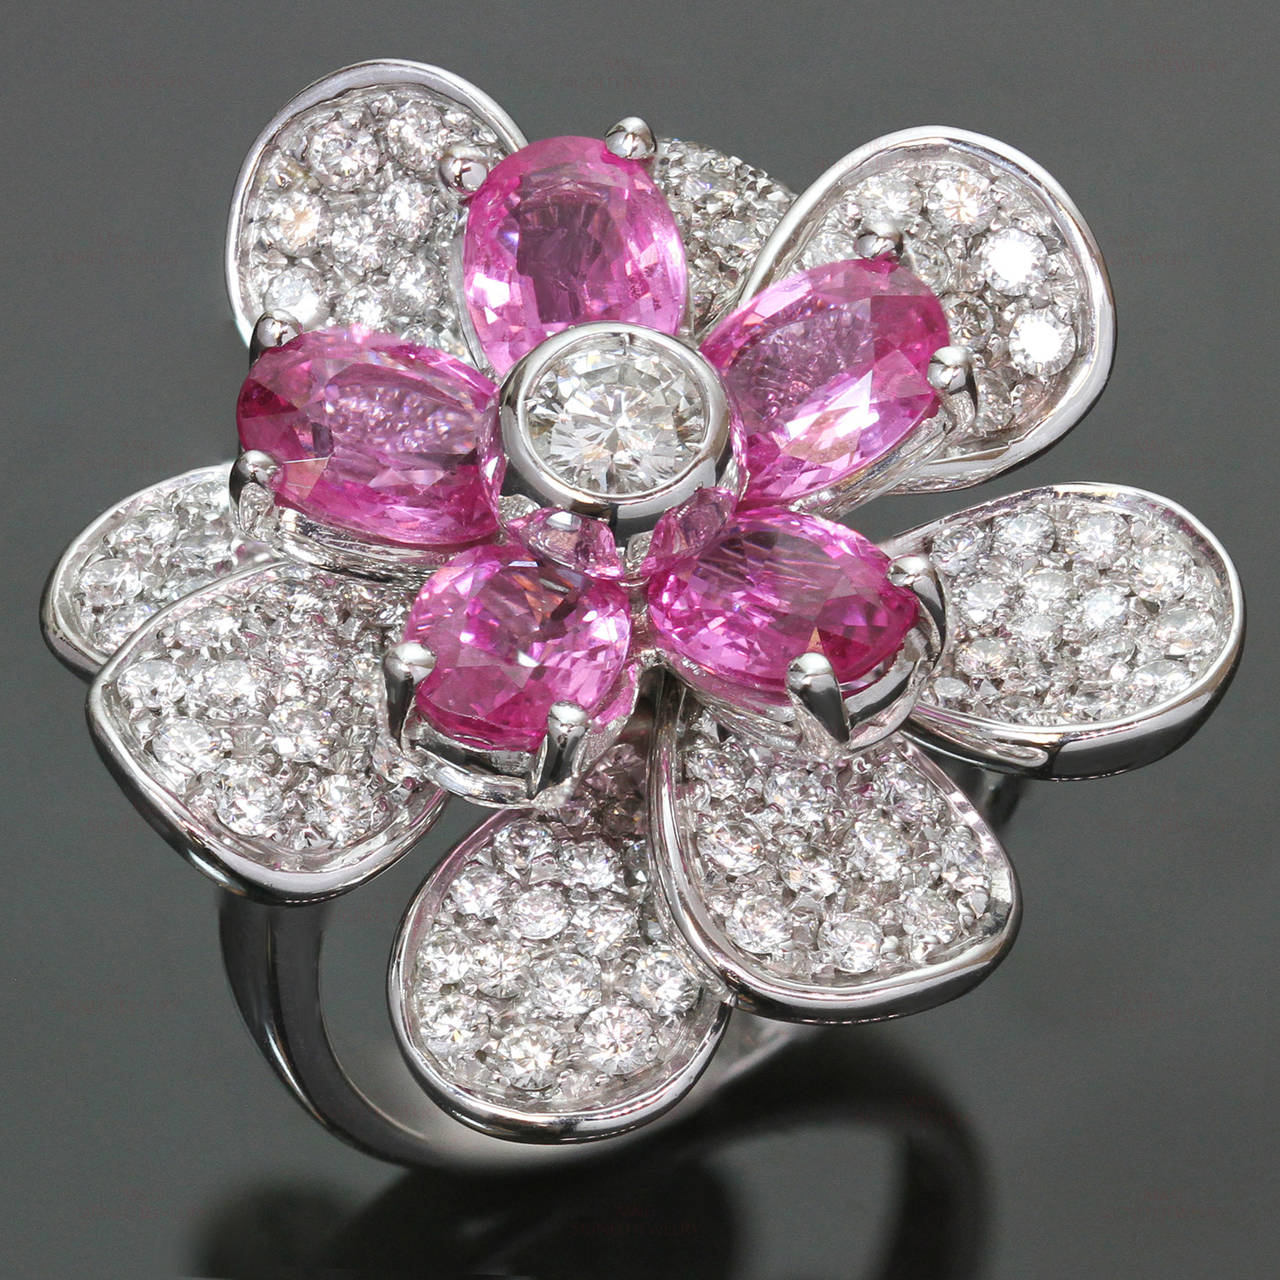 This stunning Luca Carati ring features a vibrant flower design crafted in 18k yellow gold and set with faceted pink sapphires and and sparkling round brilliant-cut diamonds of an estimated 3.0 carats. Made in Italy circa 2000s. Measurements: 1.10